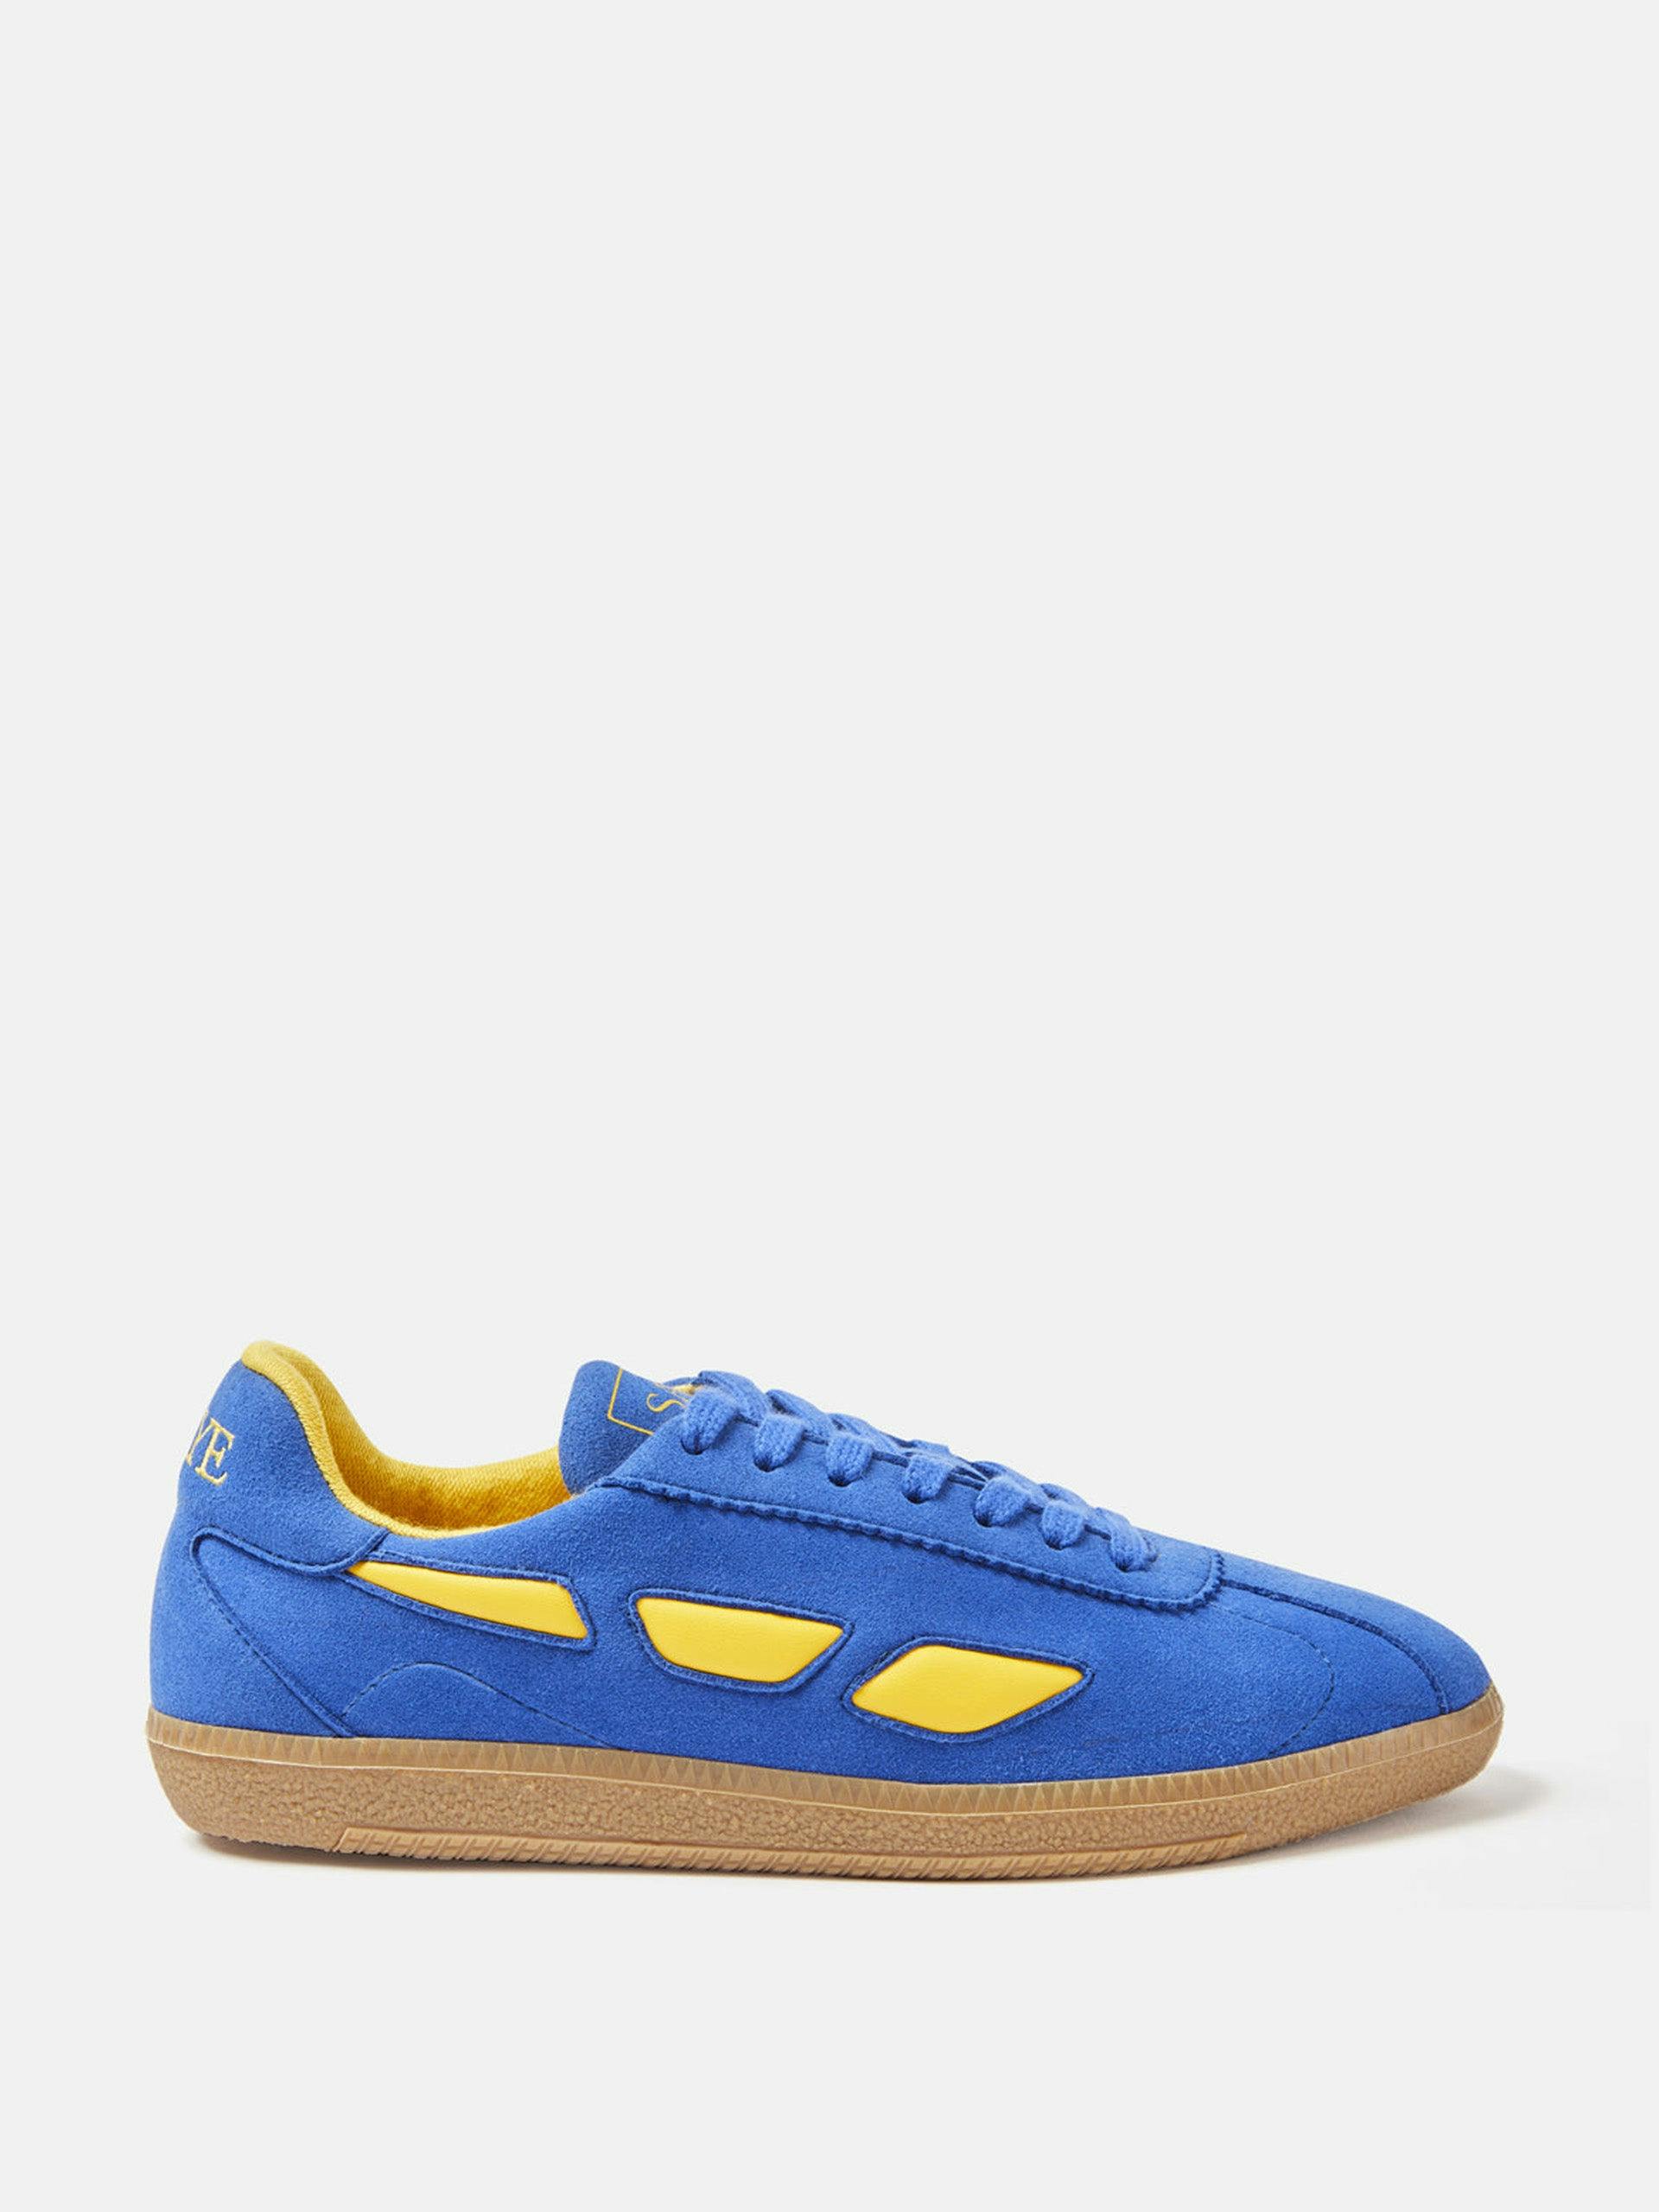 Modelo '70 trainer in blue and yellow